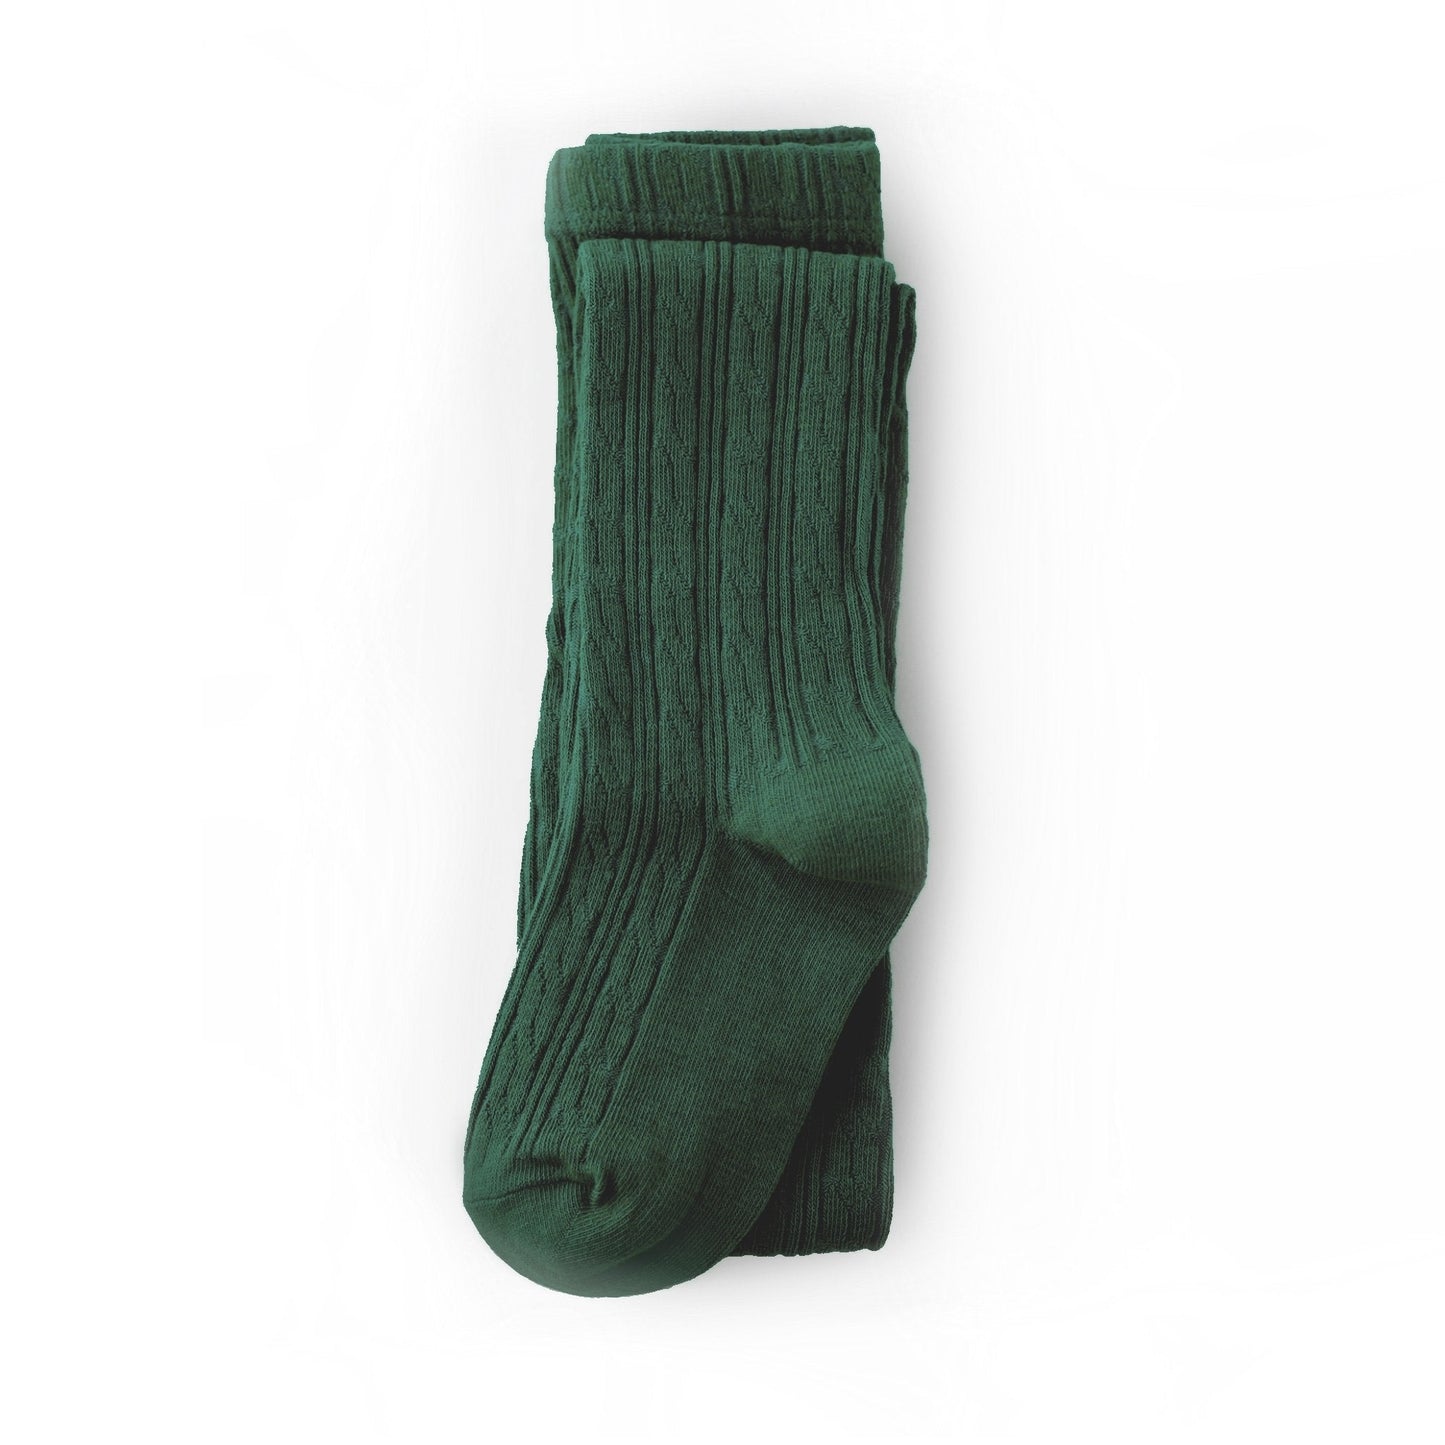 Forest green cable knit tights by little stocking co.